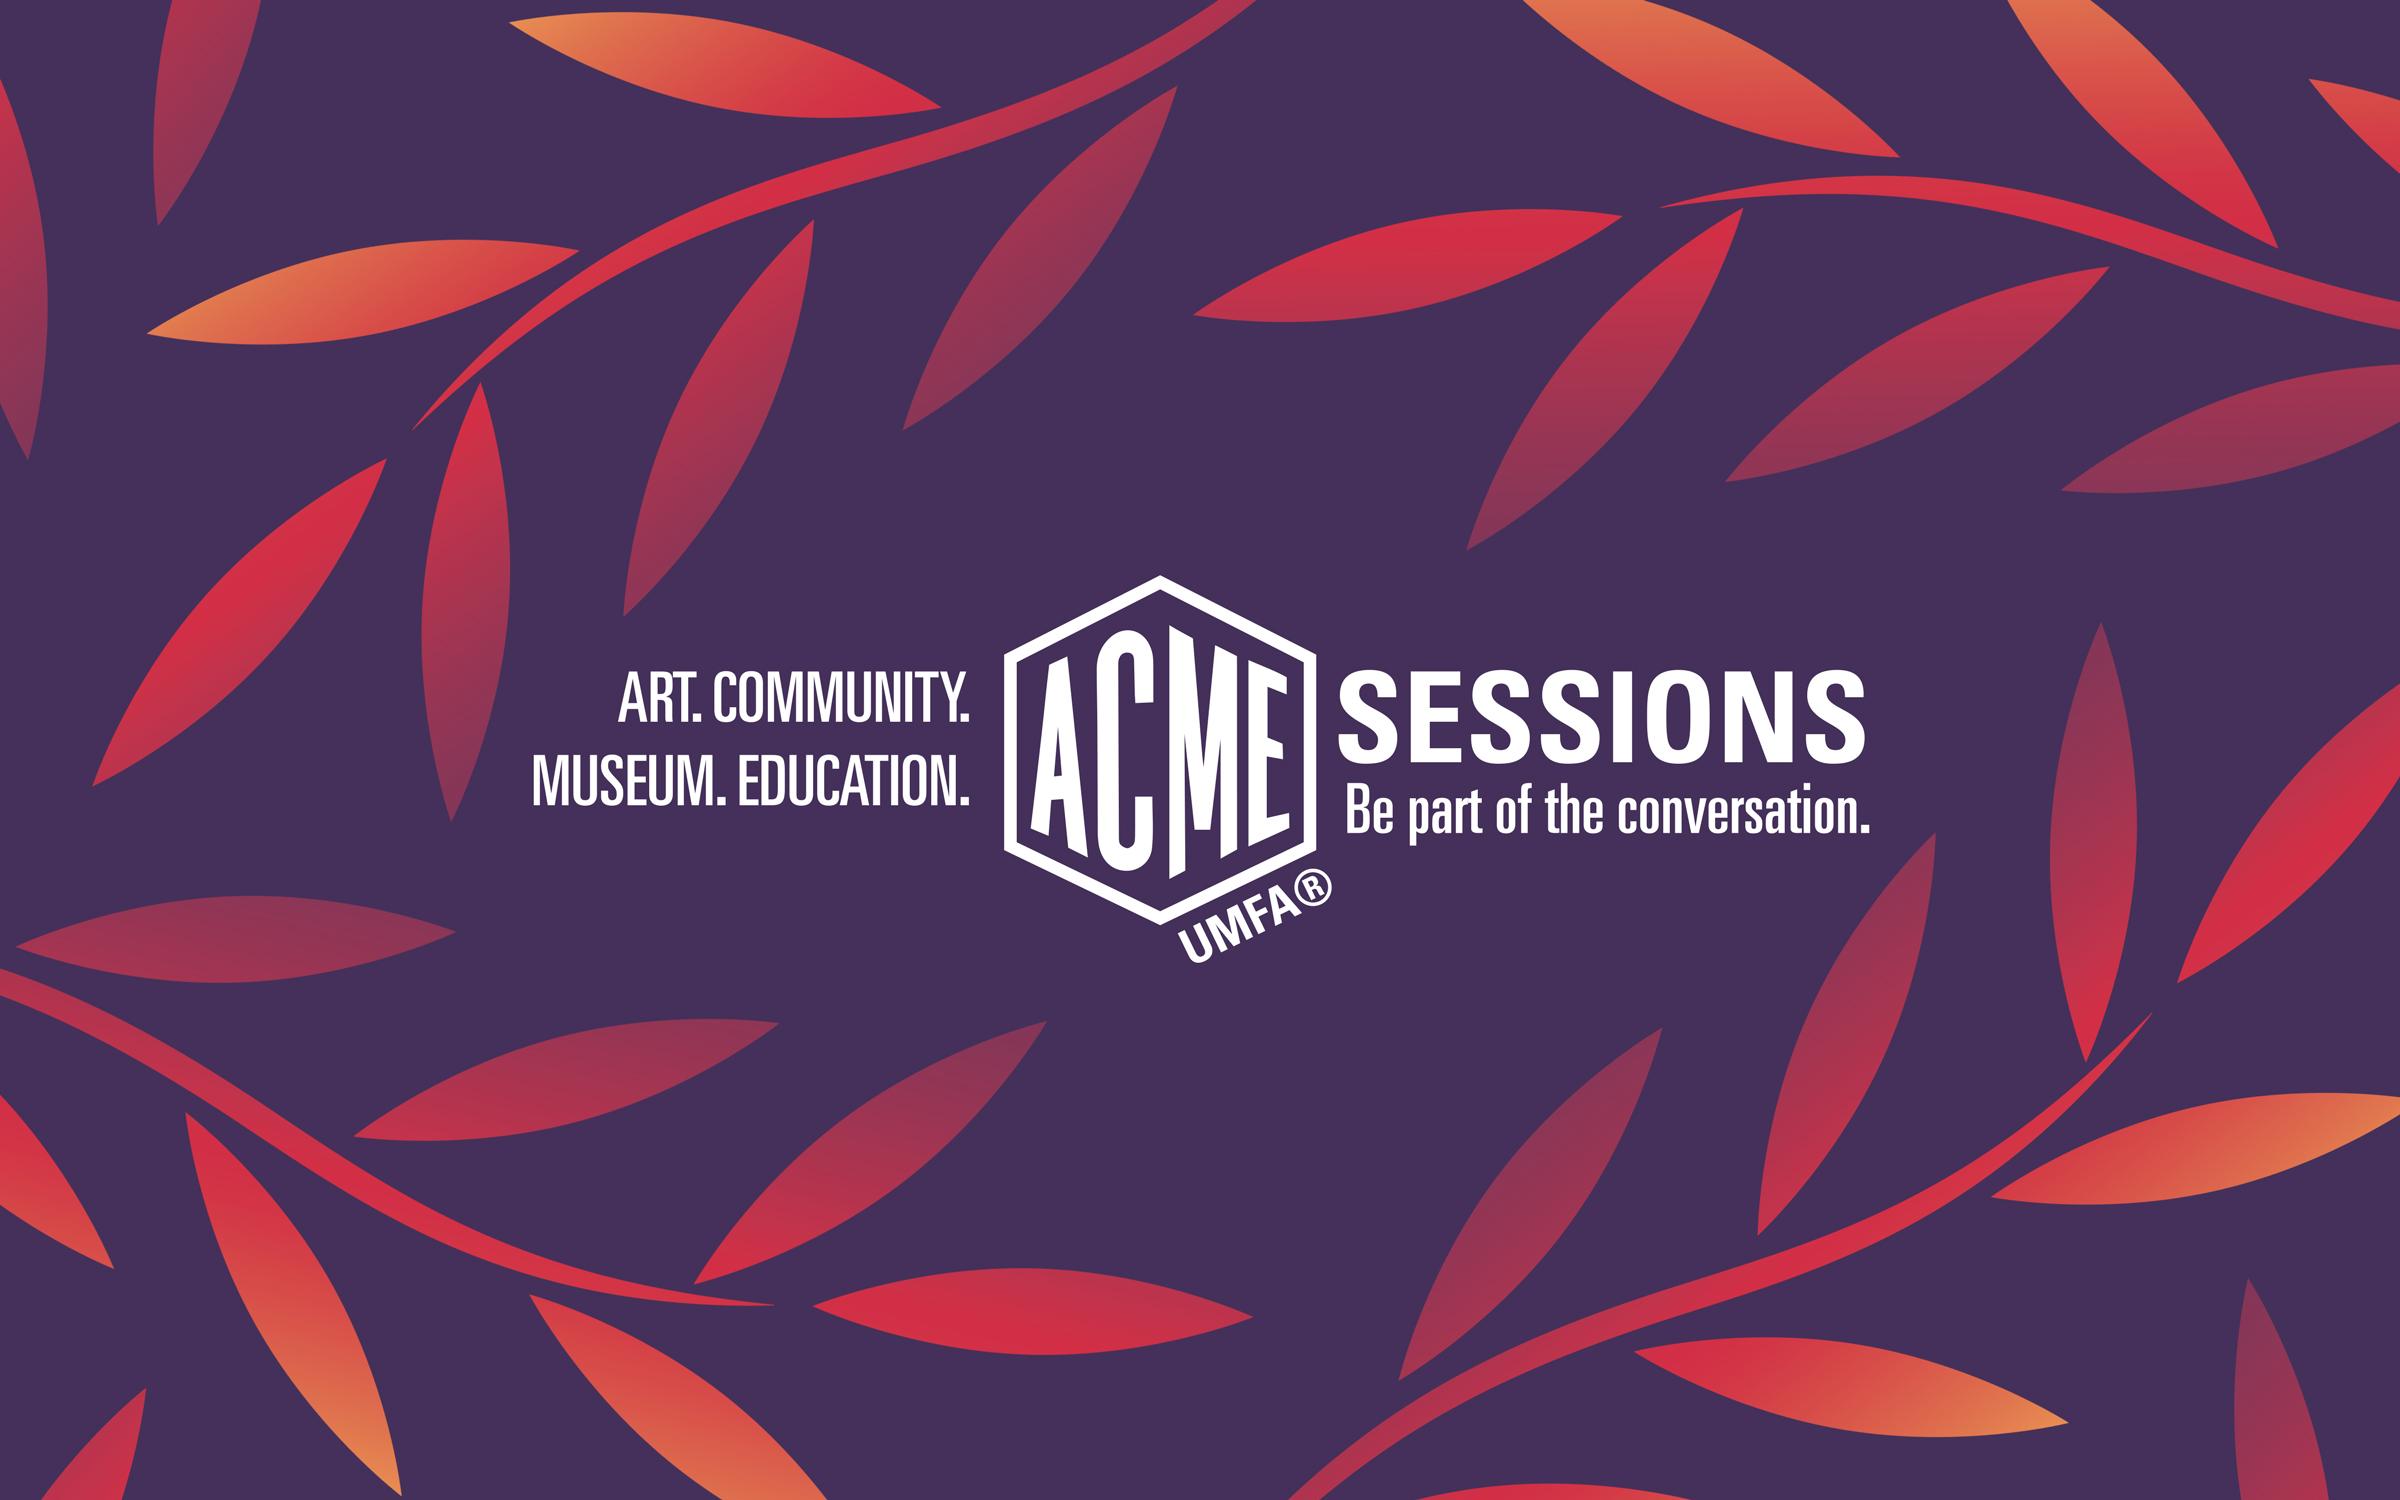 Acme Sessions